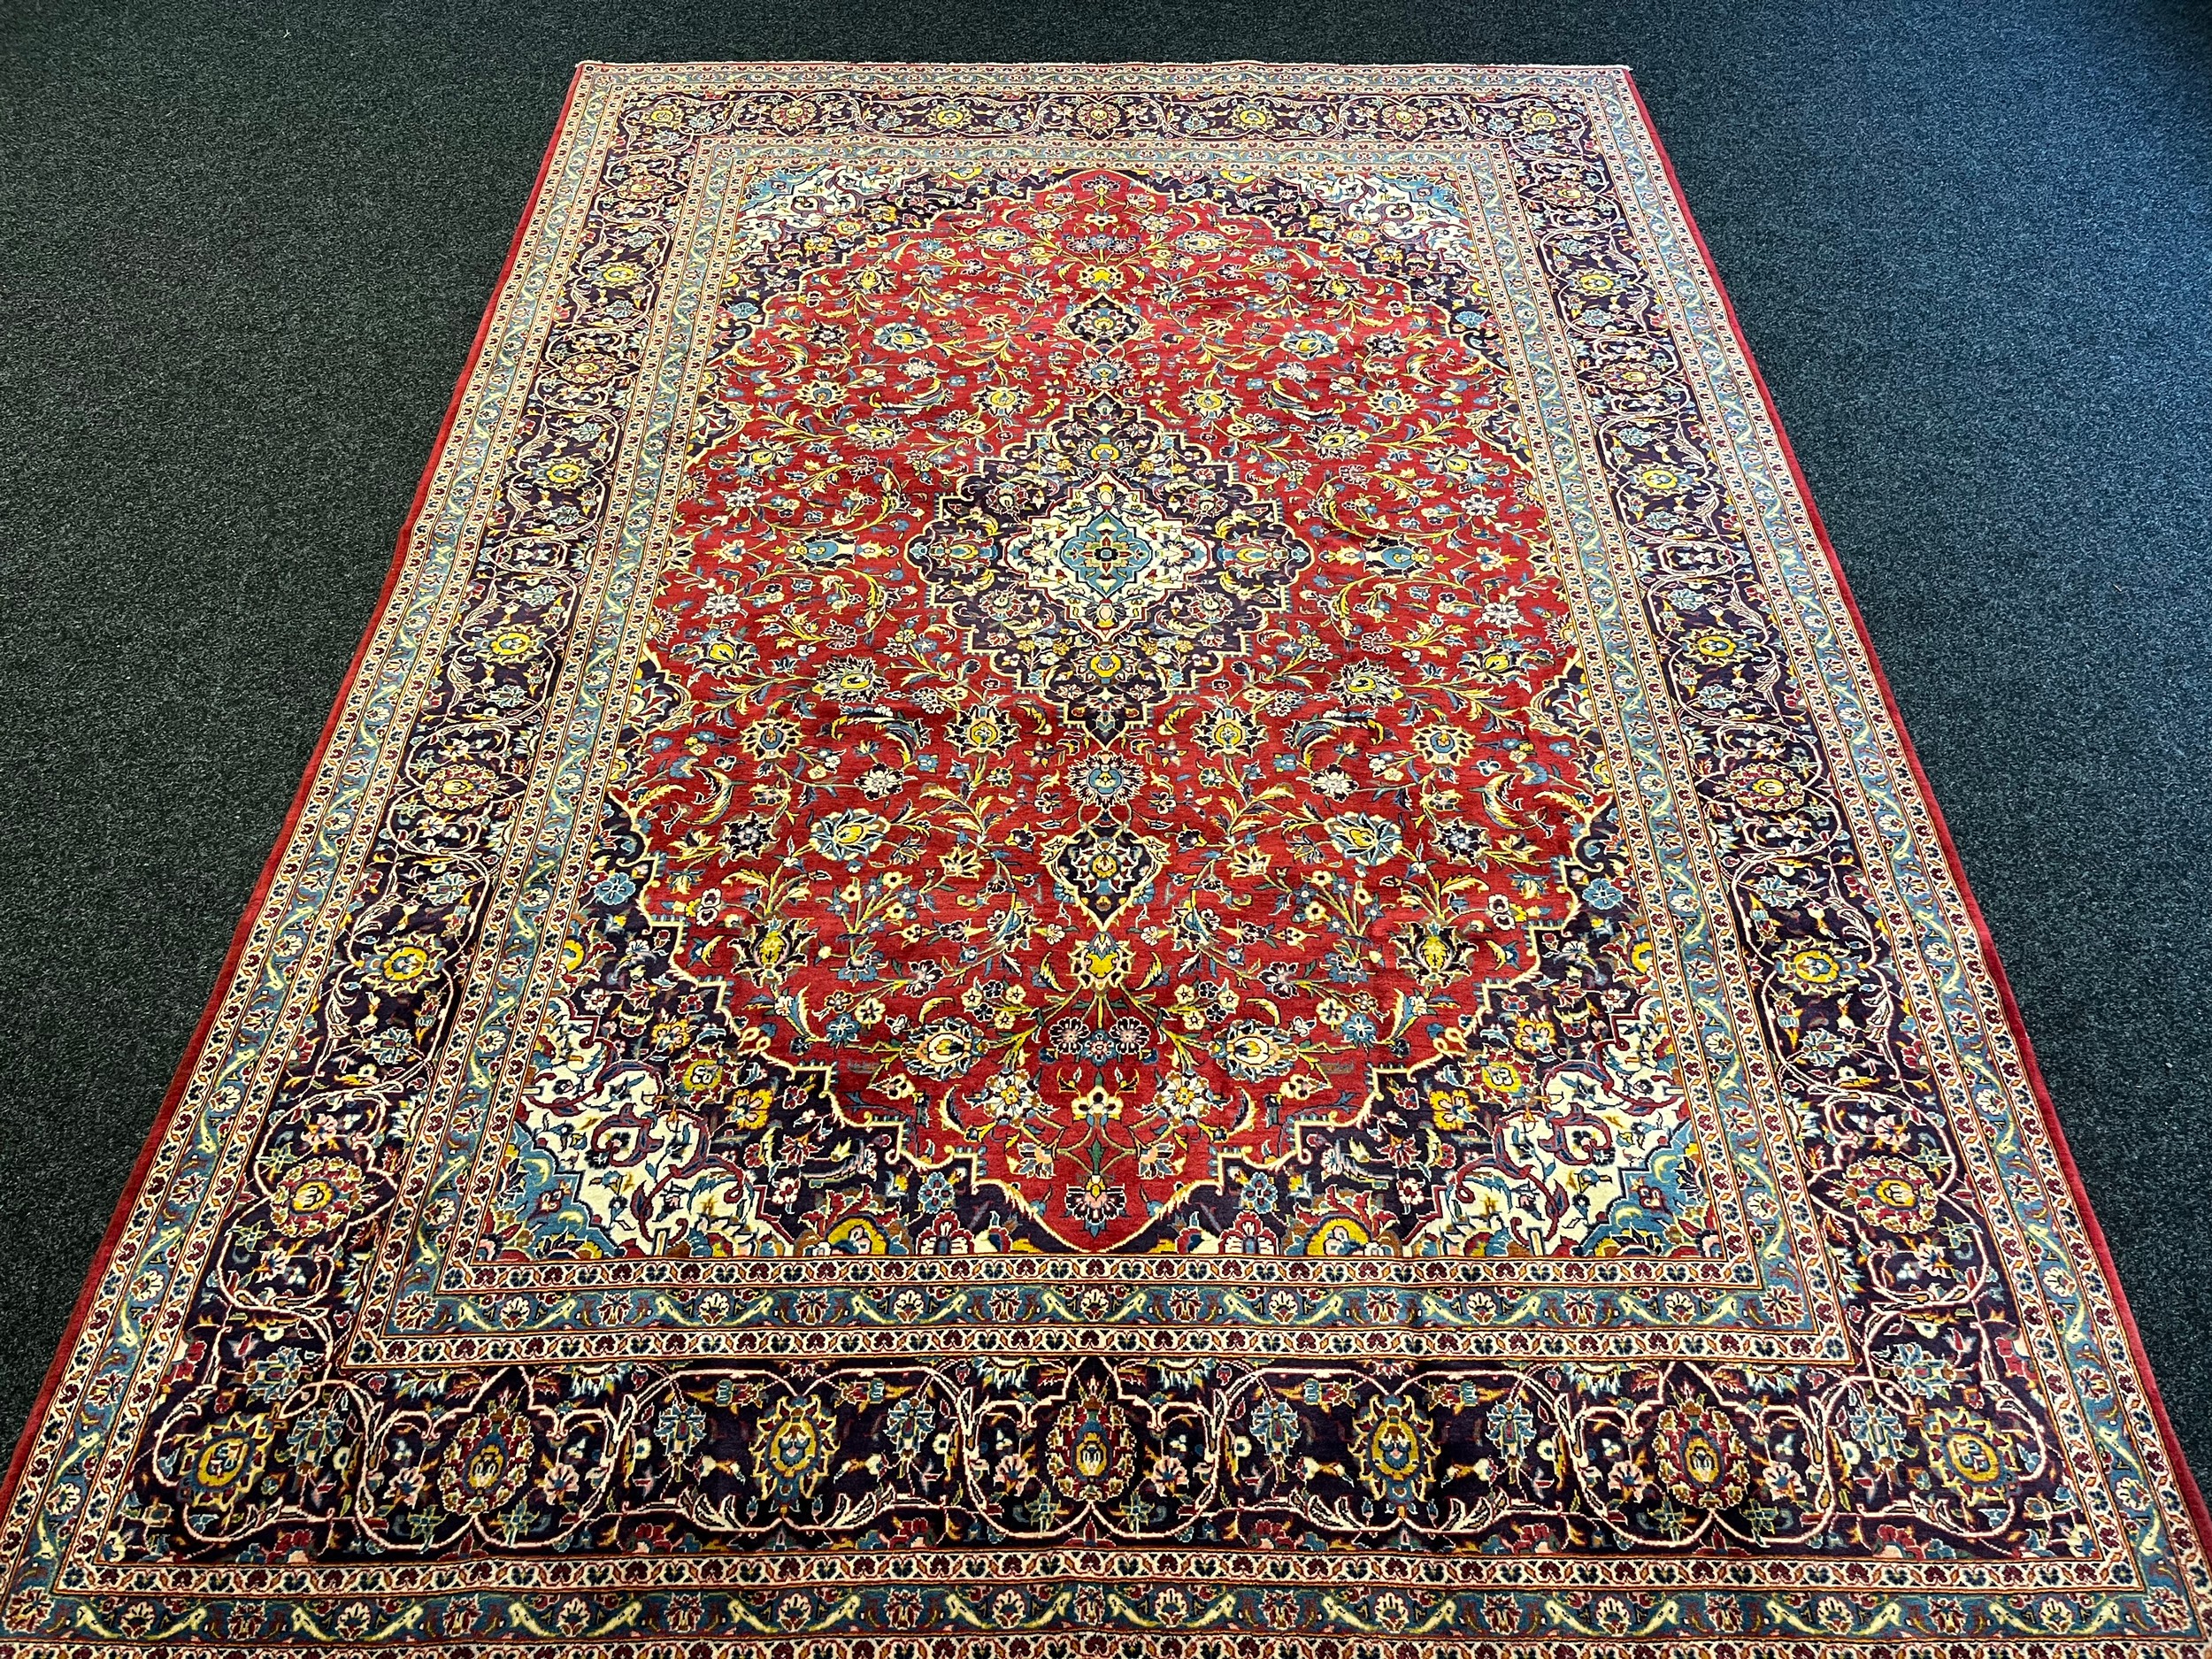 Large Persian carpet/rug, highly decorative with red ground. [535x296cm]